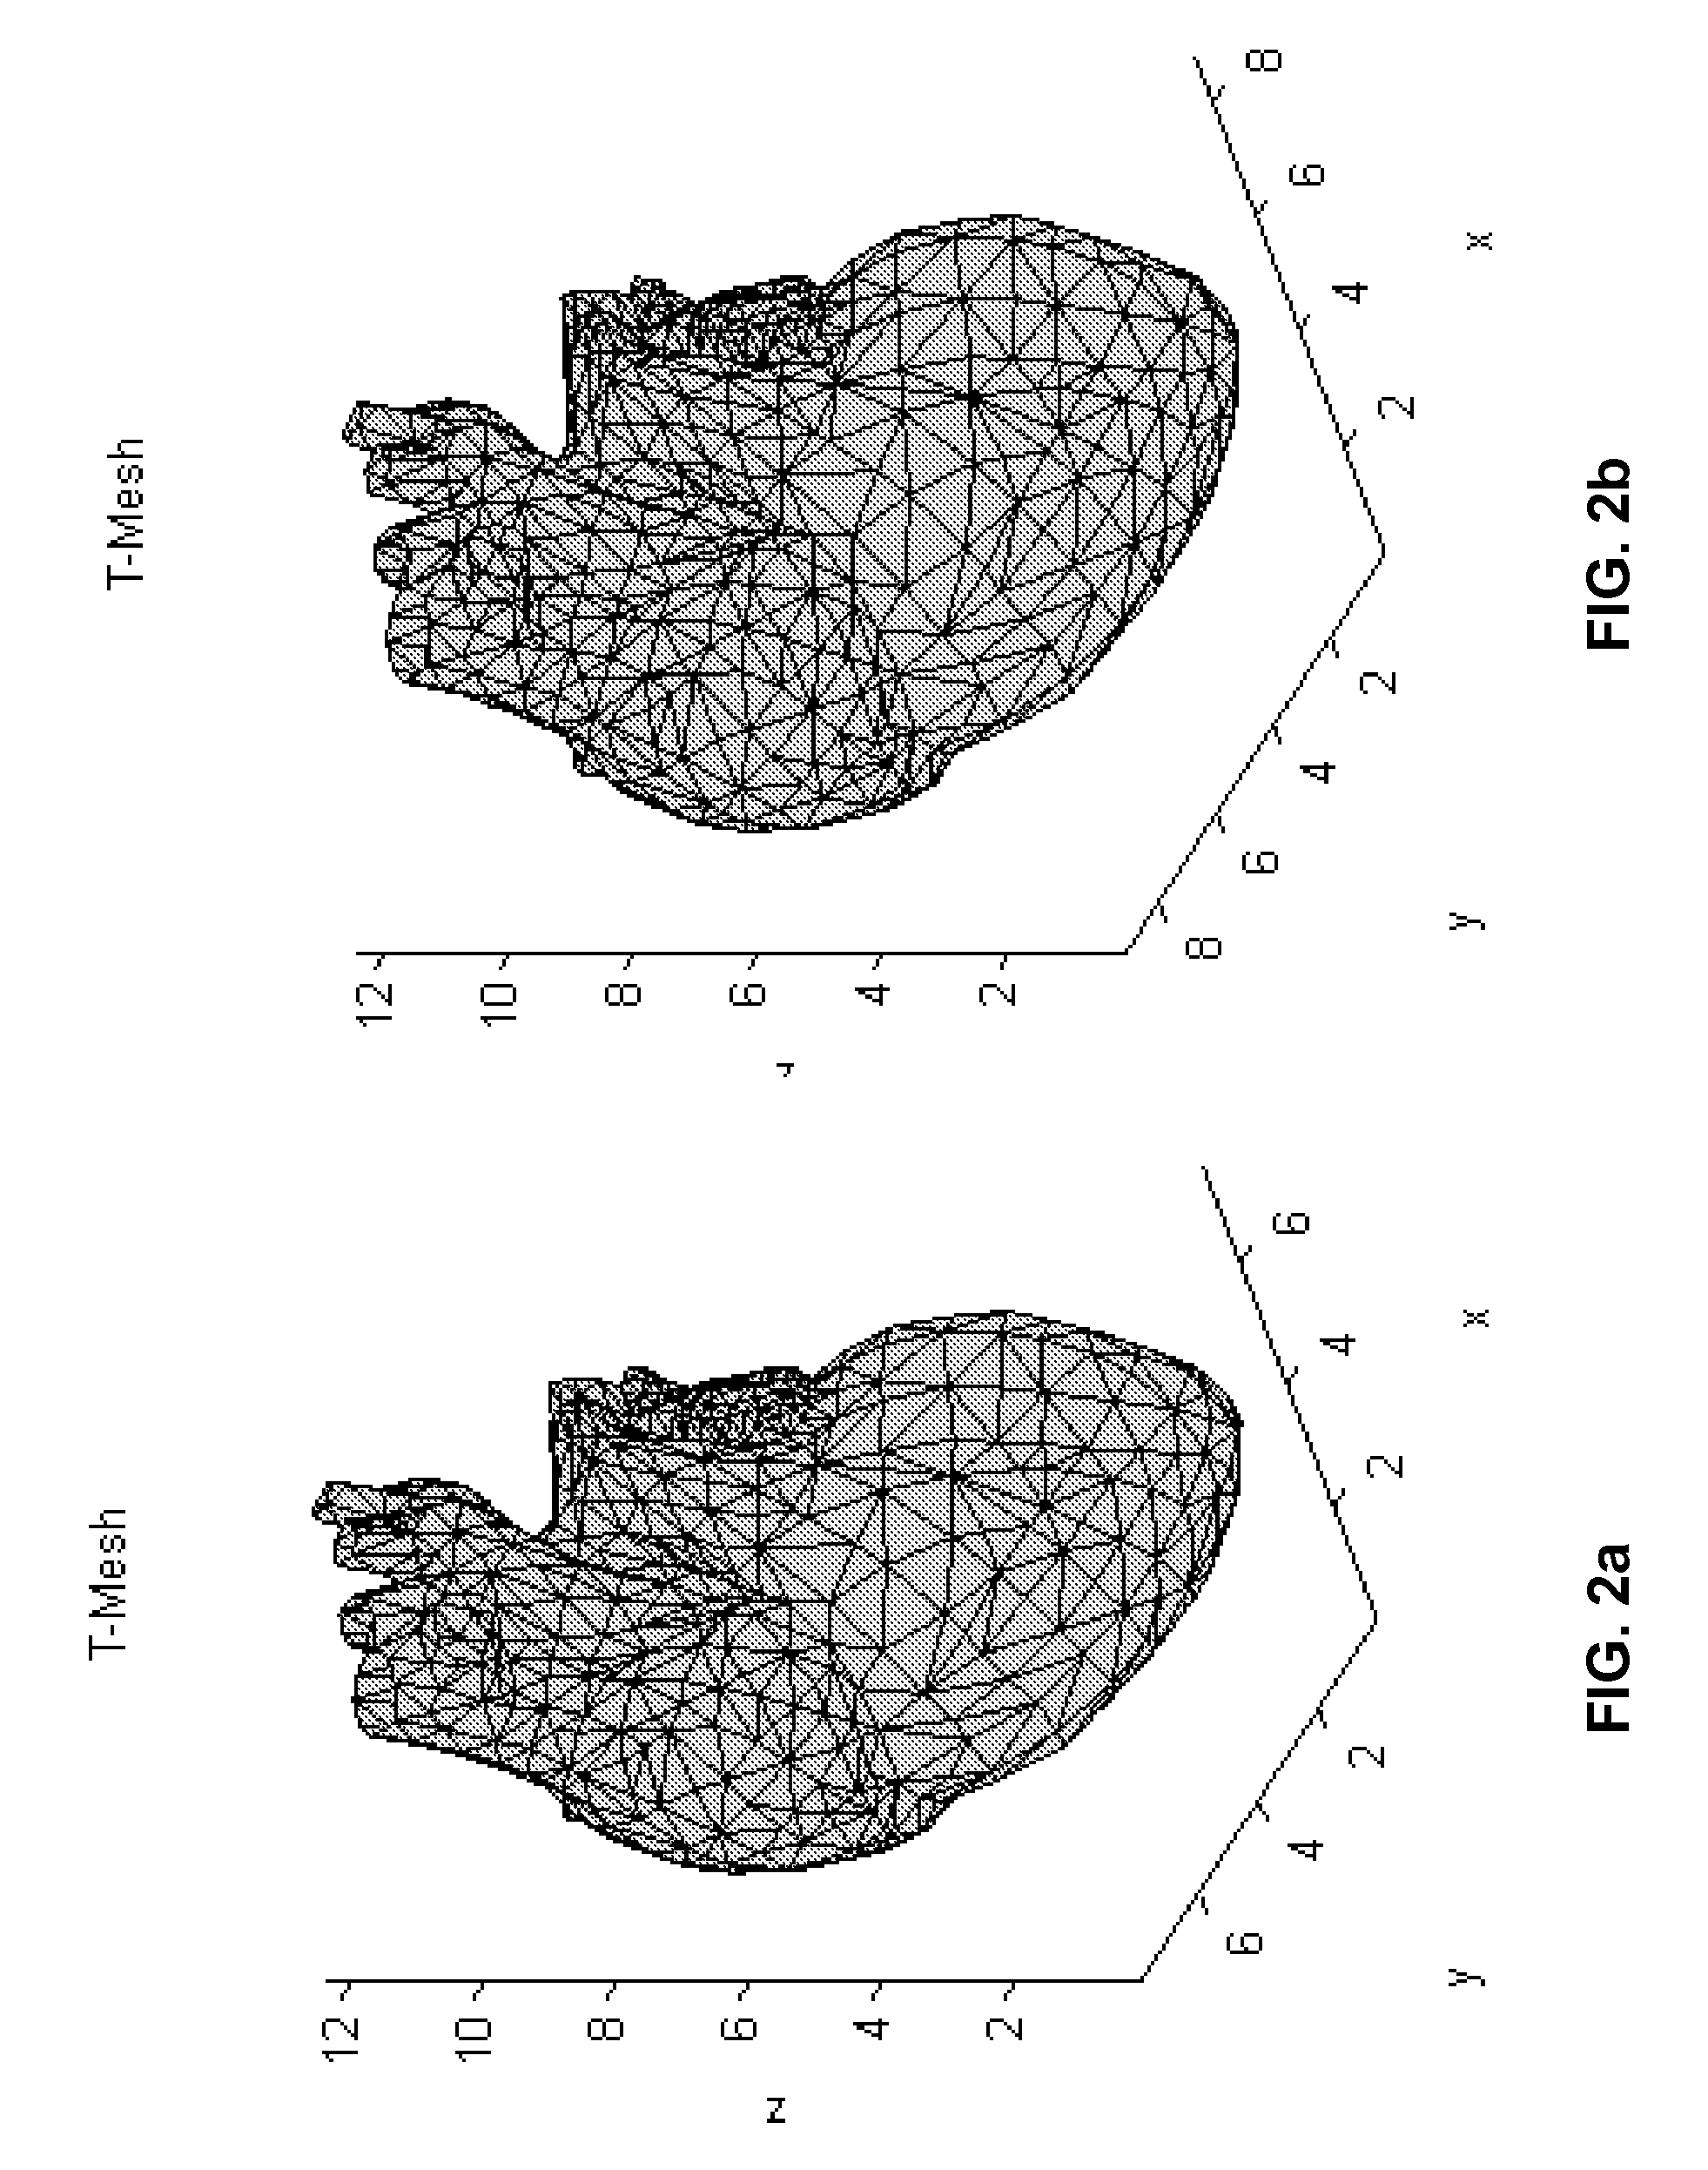 System and method for non-invasive instantaneous and continuous measurement of cardiac chamber volume.